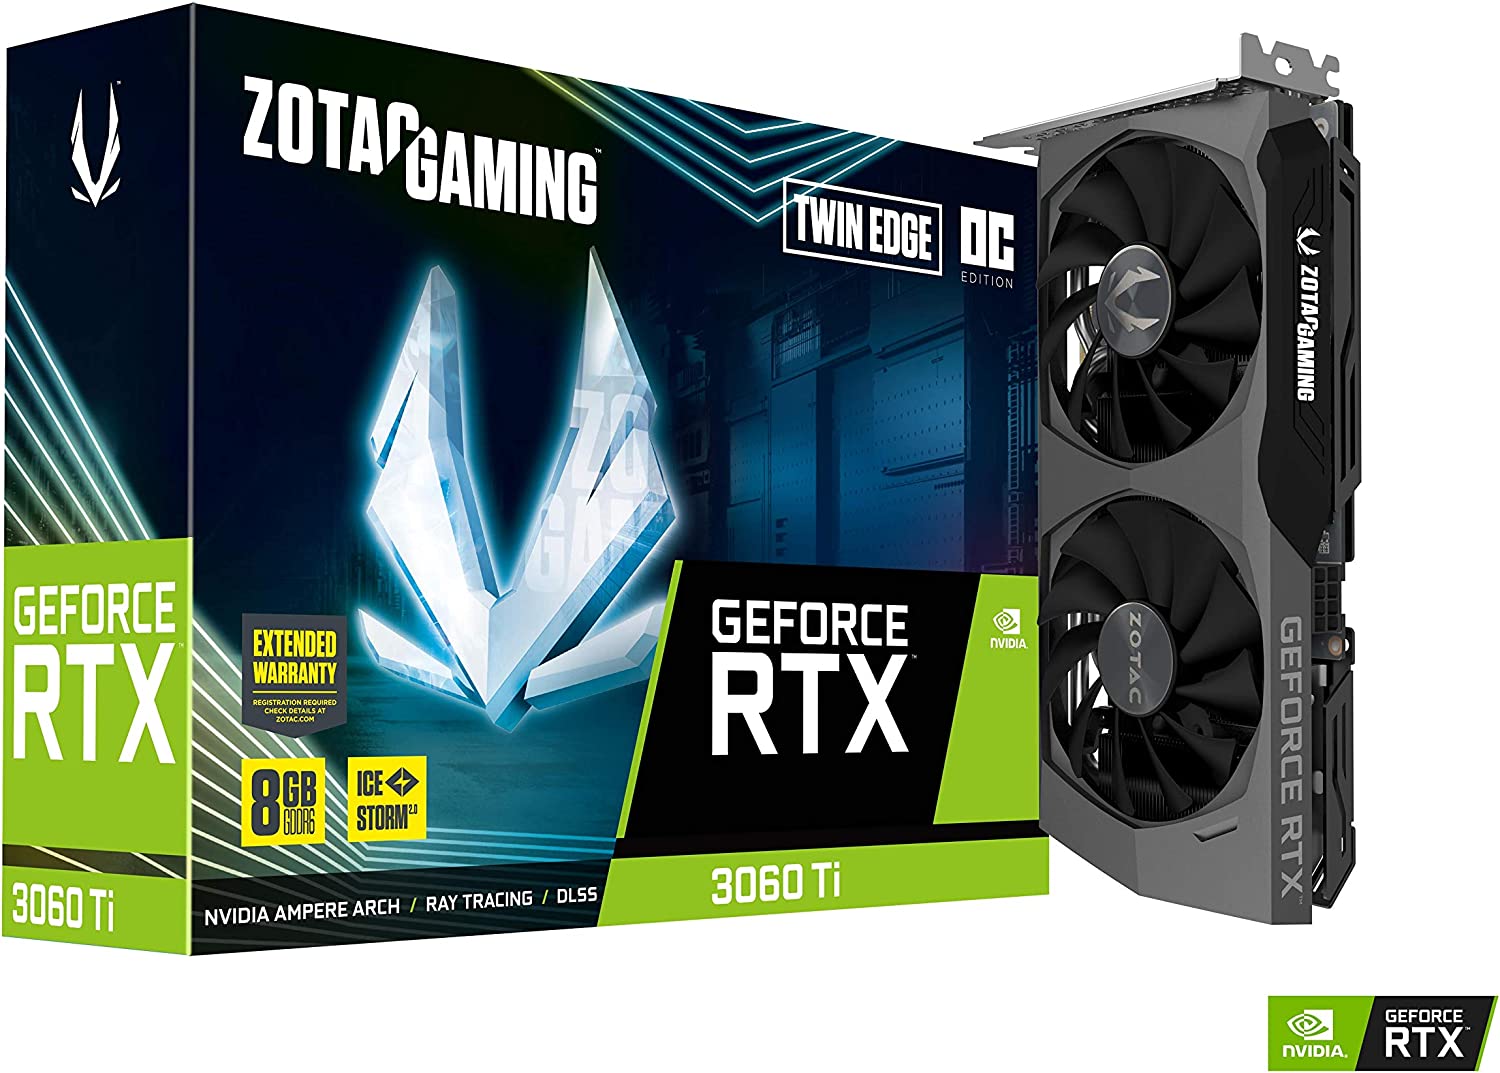 ZOTAC GeForce RTX™ 3060 Ti Twin Edge OC LHR 8GB GDDR6 256-bit 14 Gbps PCIE 4.0 Gaming Graphics Card, IceStorm 2.0 Advanced Cooling, Active Fan Control